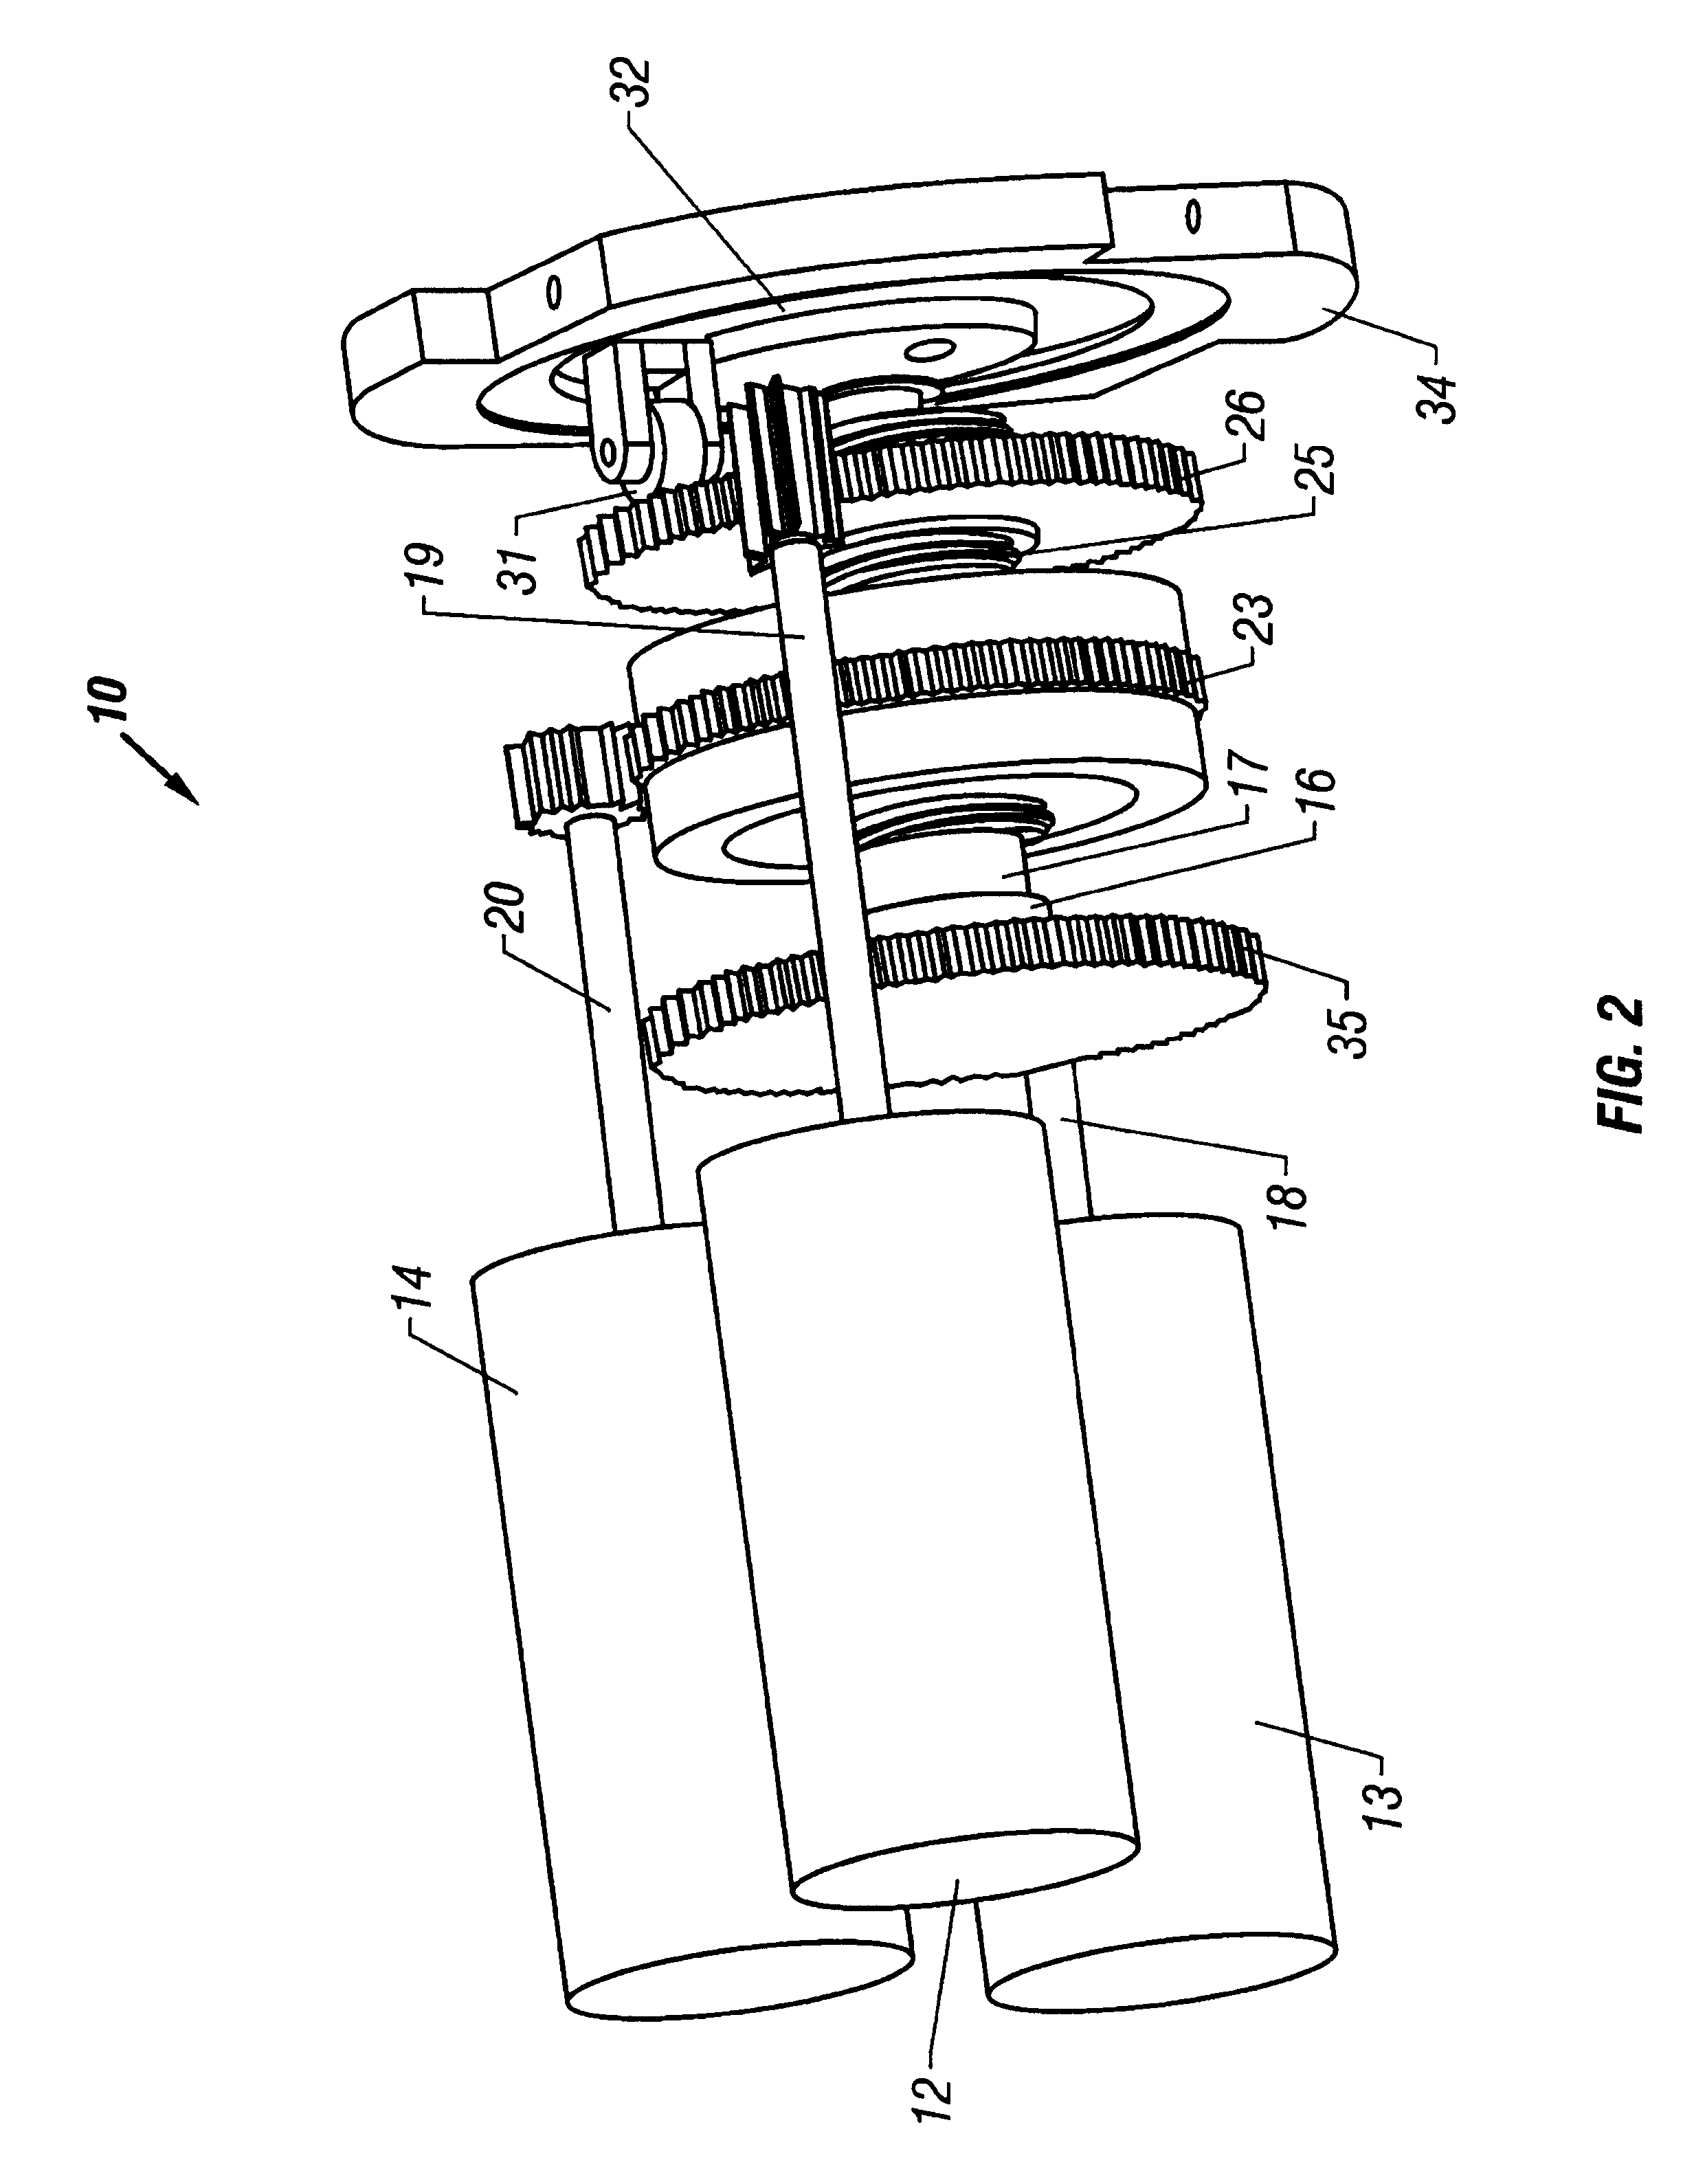 Methods and apparatus for swash plate guidance and control